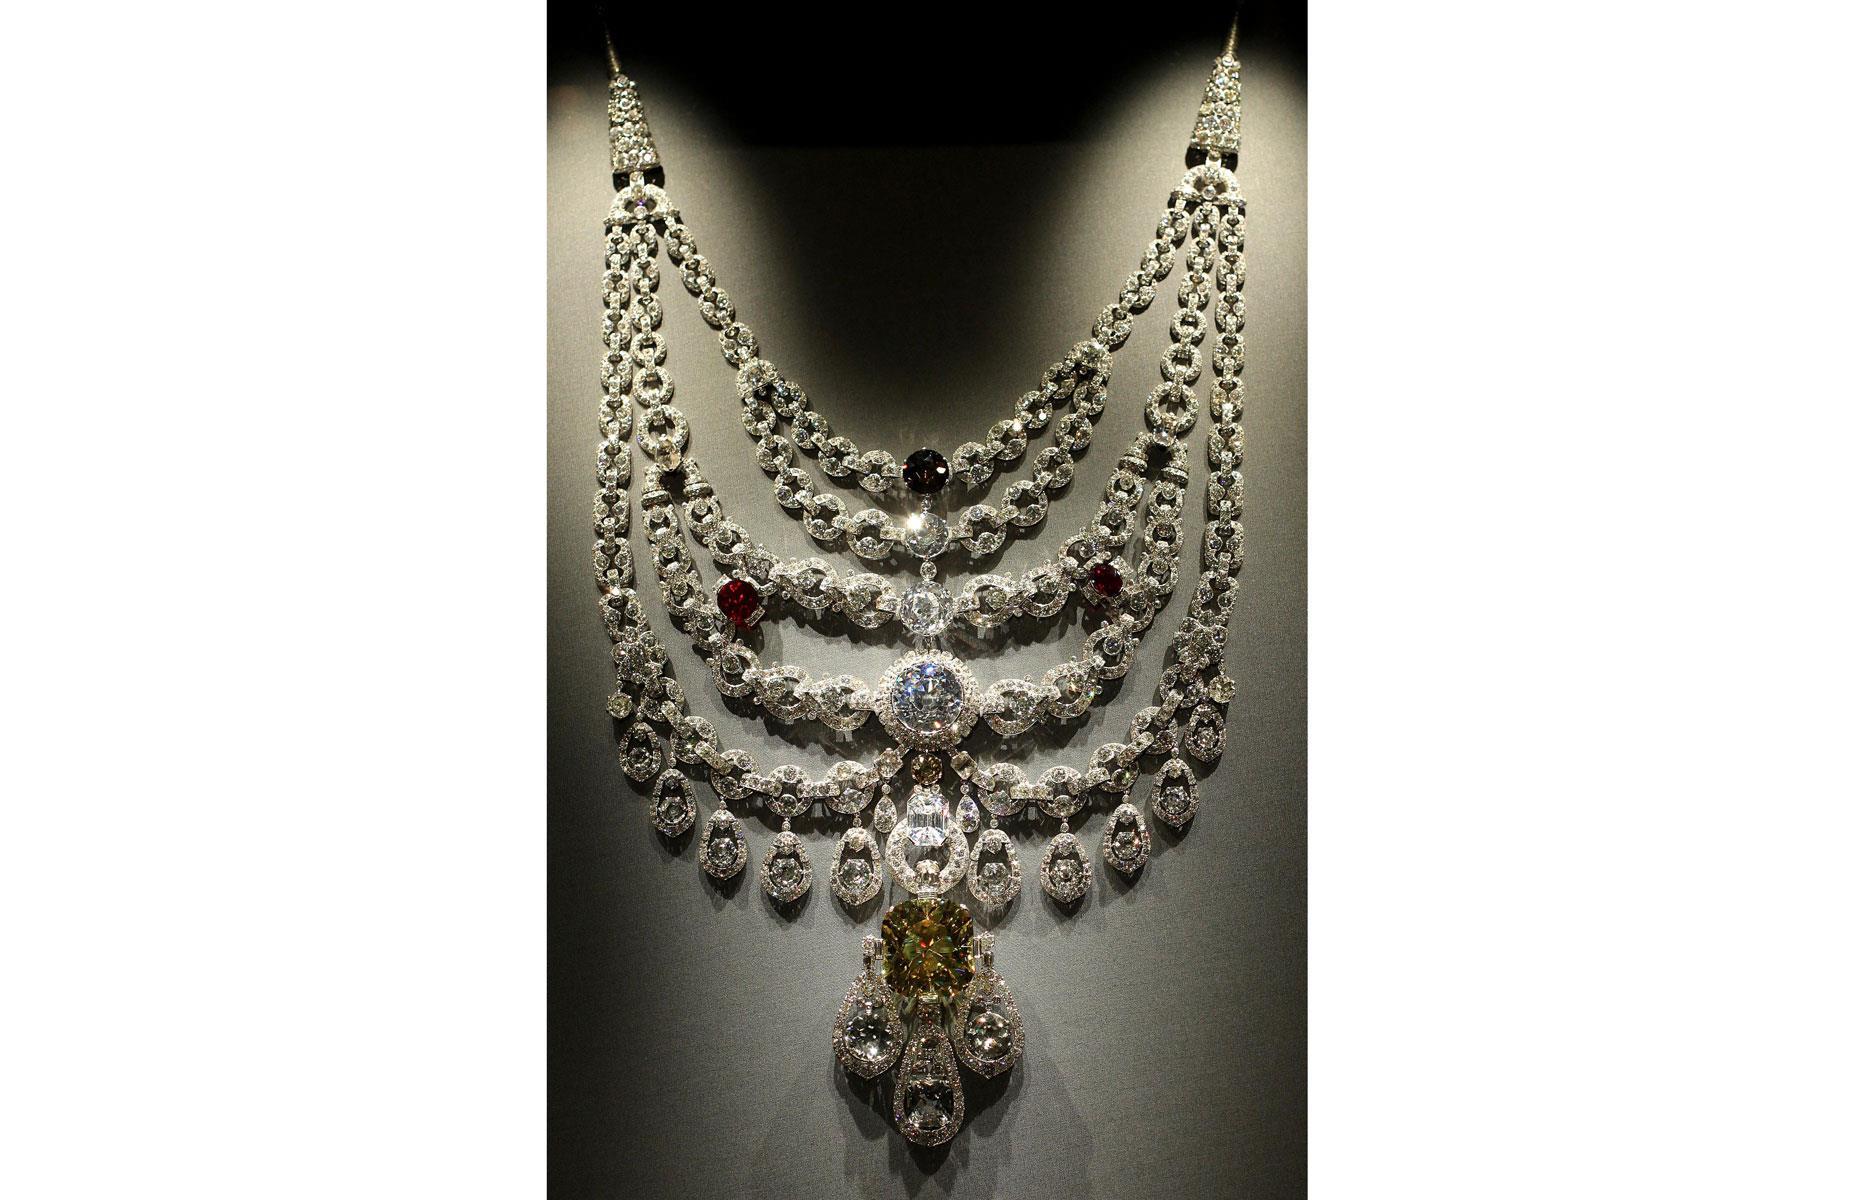 The Patiala Necklace